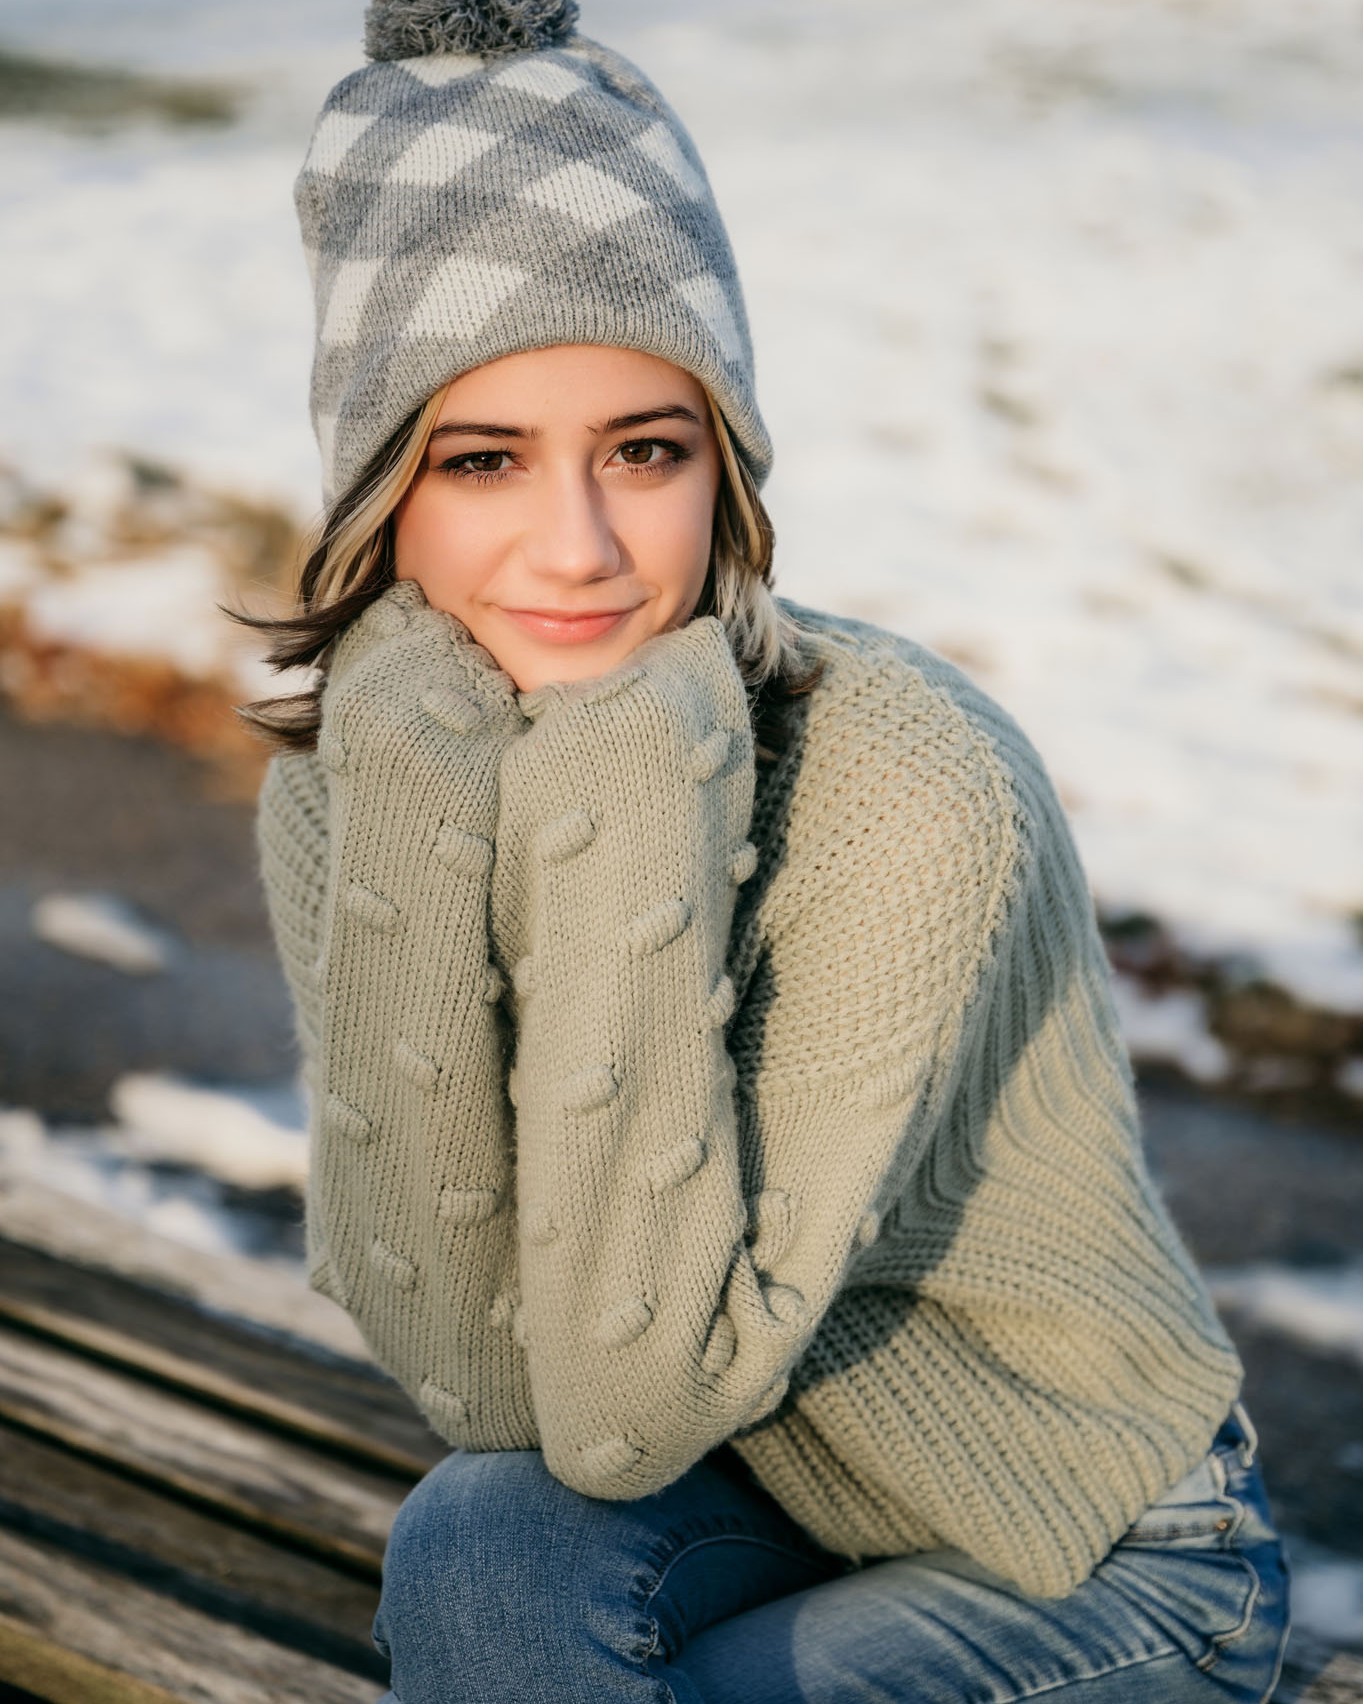 Best Time to Book My Senior Photo: senior girl wearing stocking cap in the winter